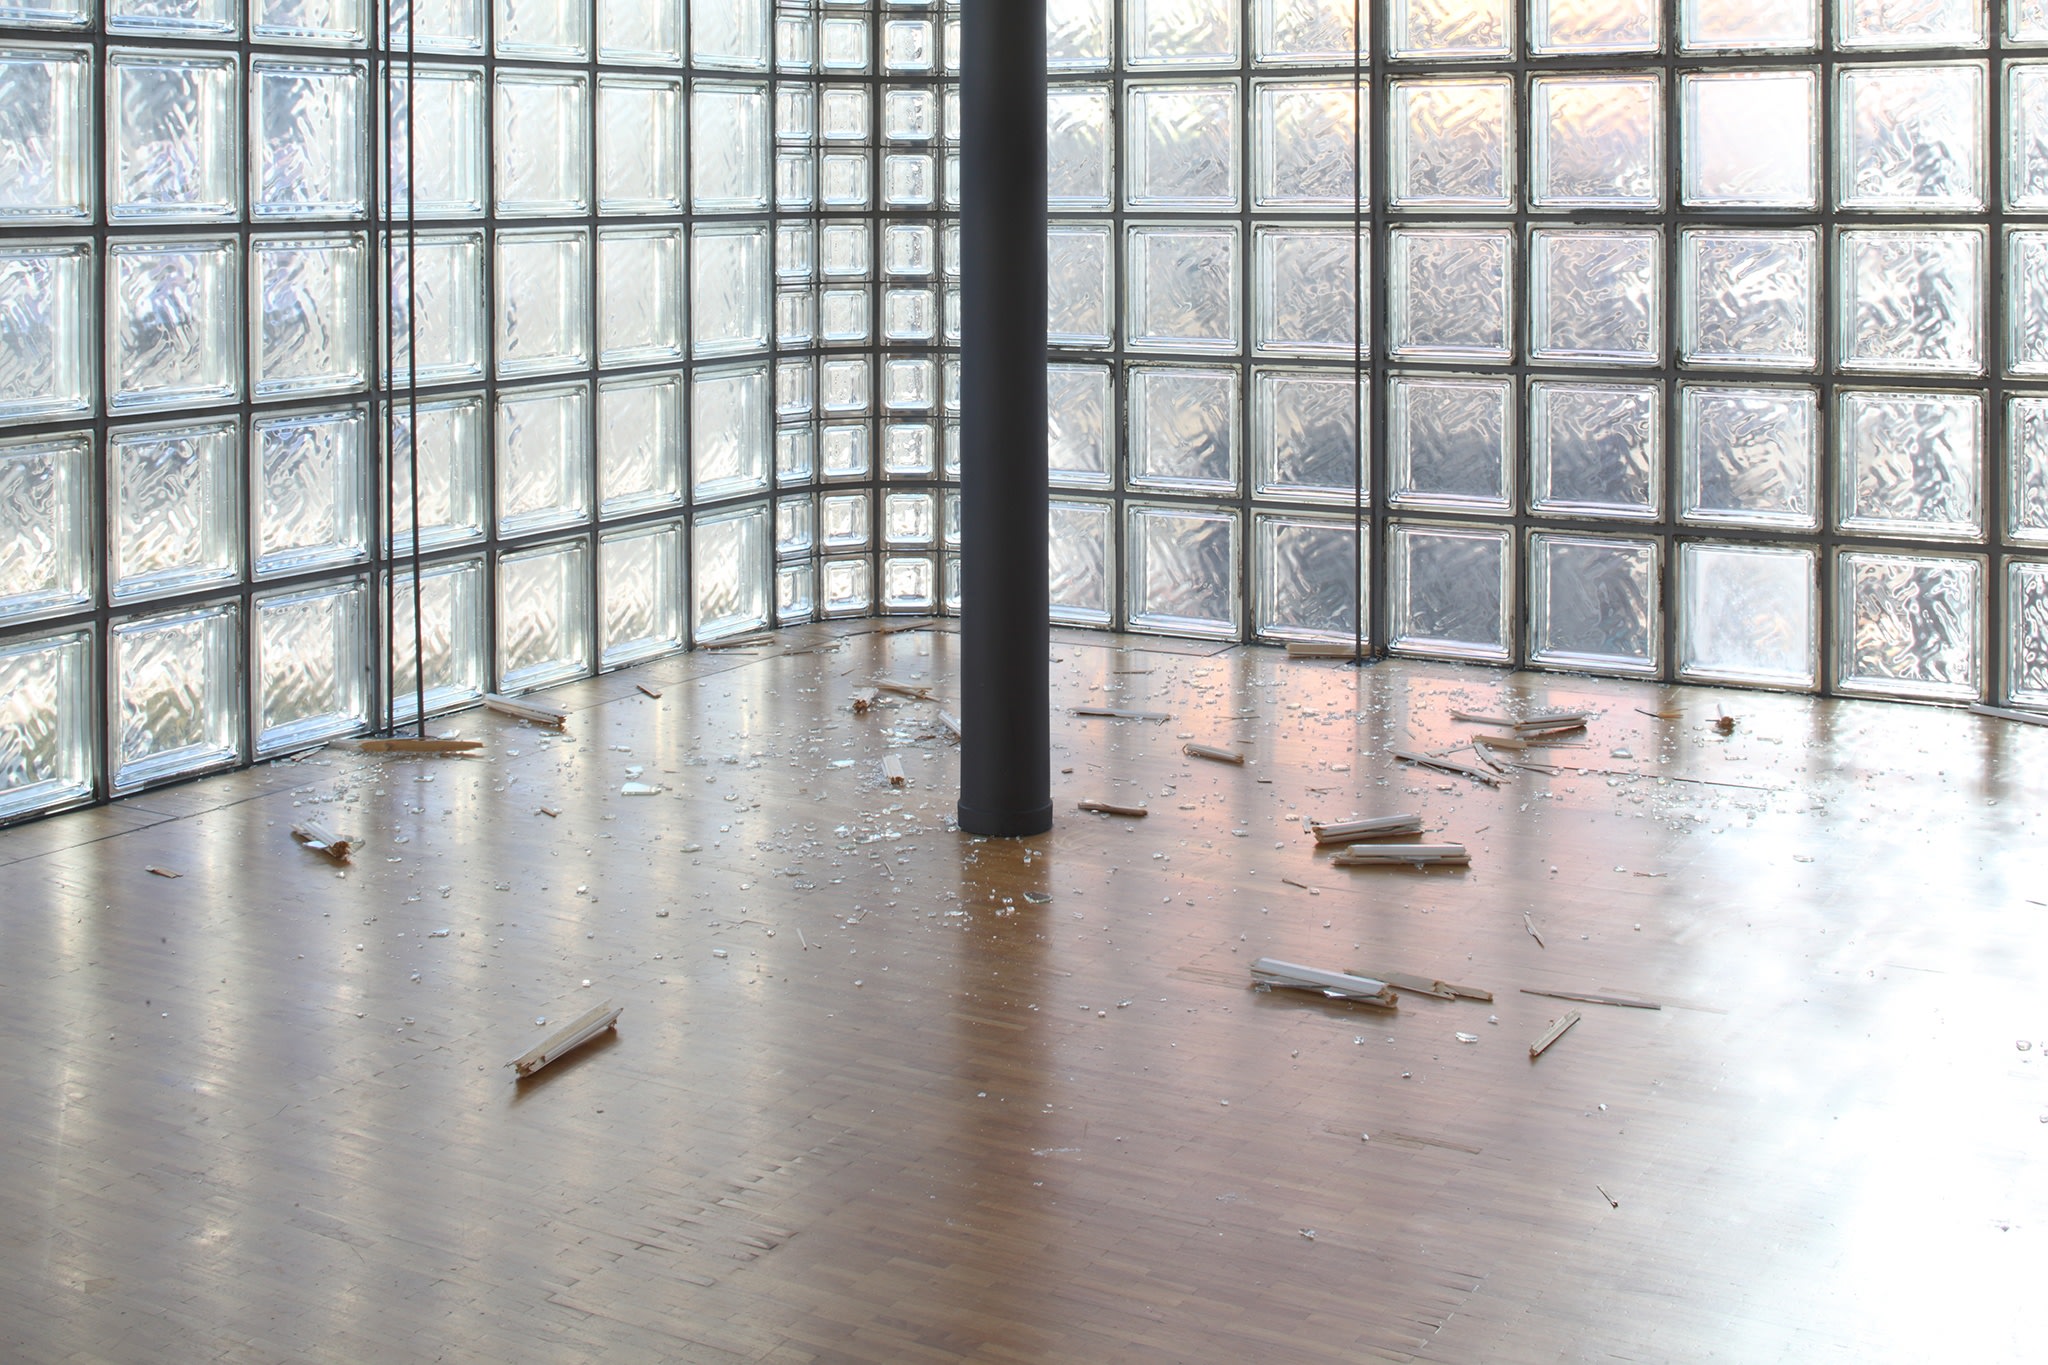 Icarus Falling – An Exhibition Lost with Ryan Gander